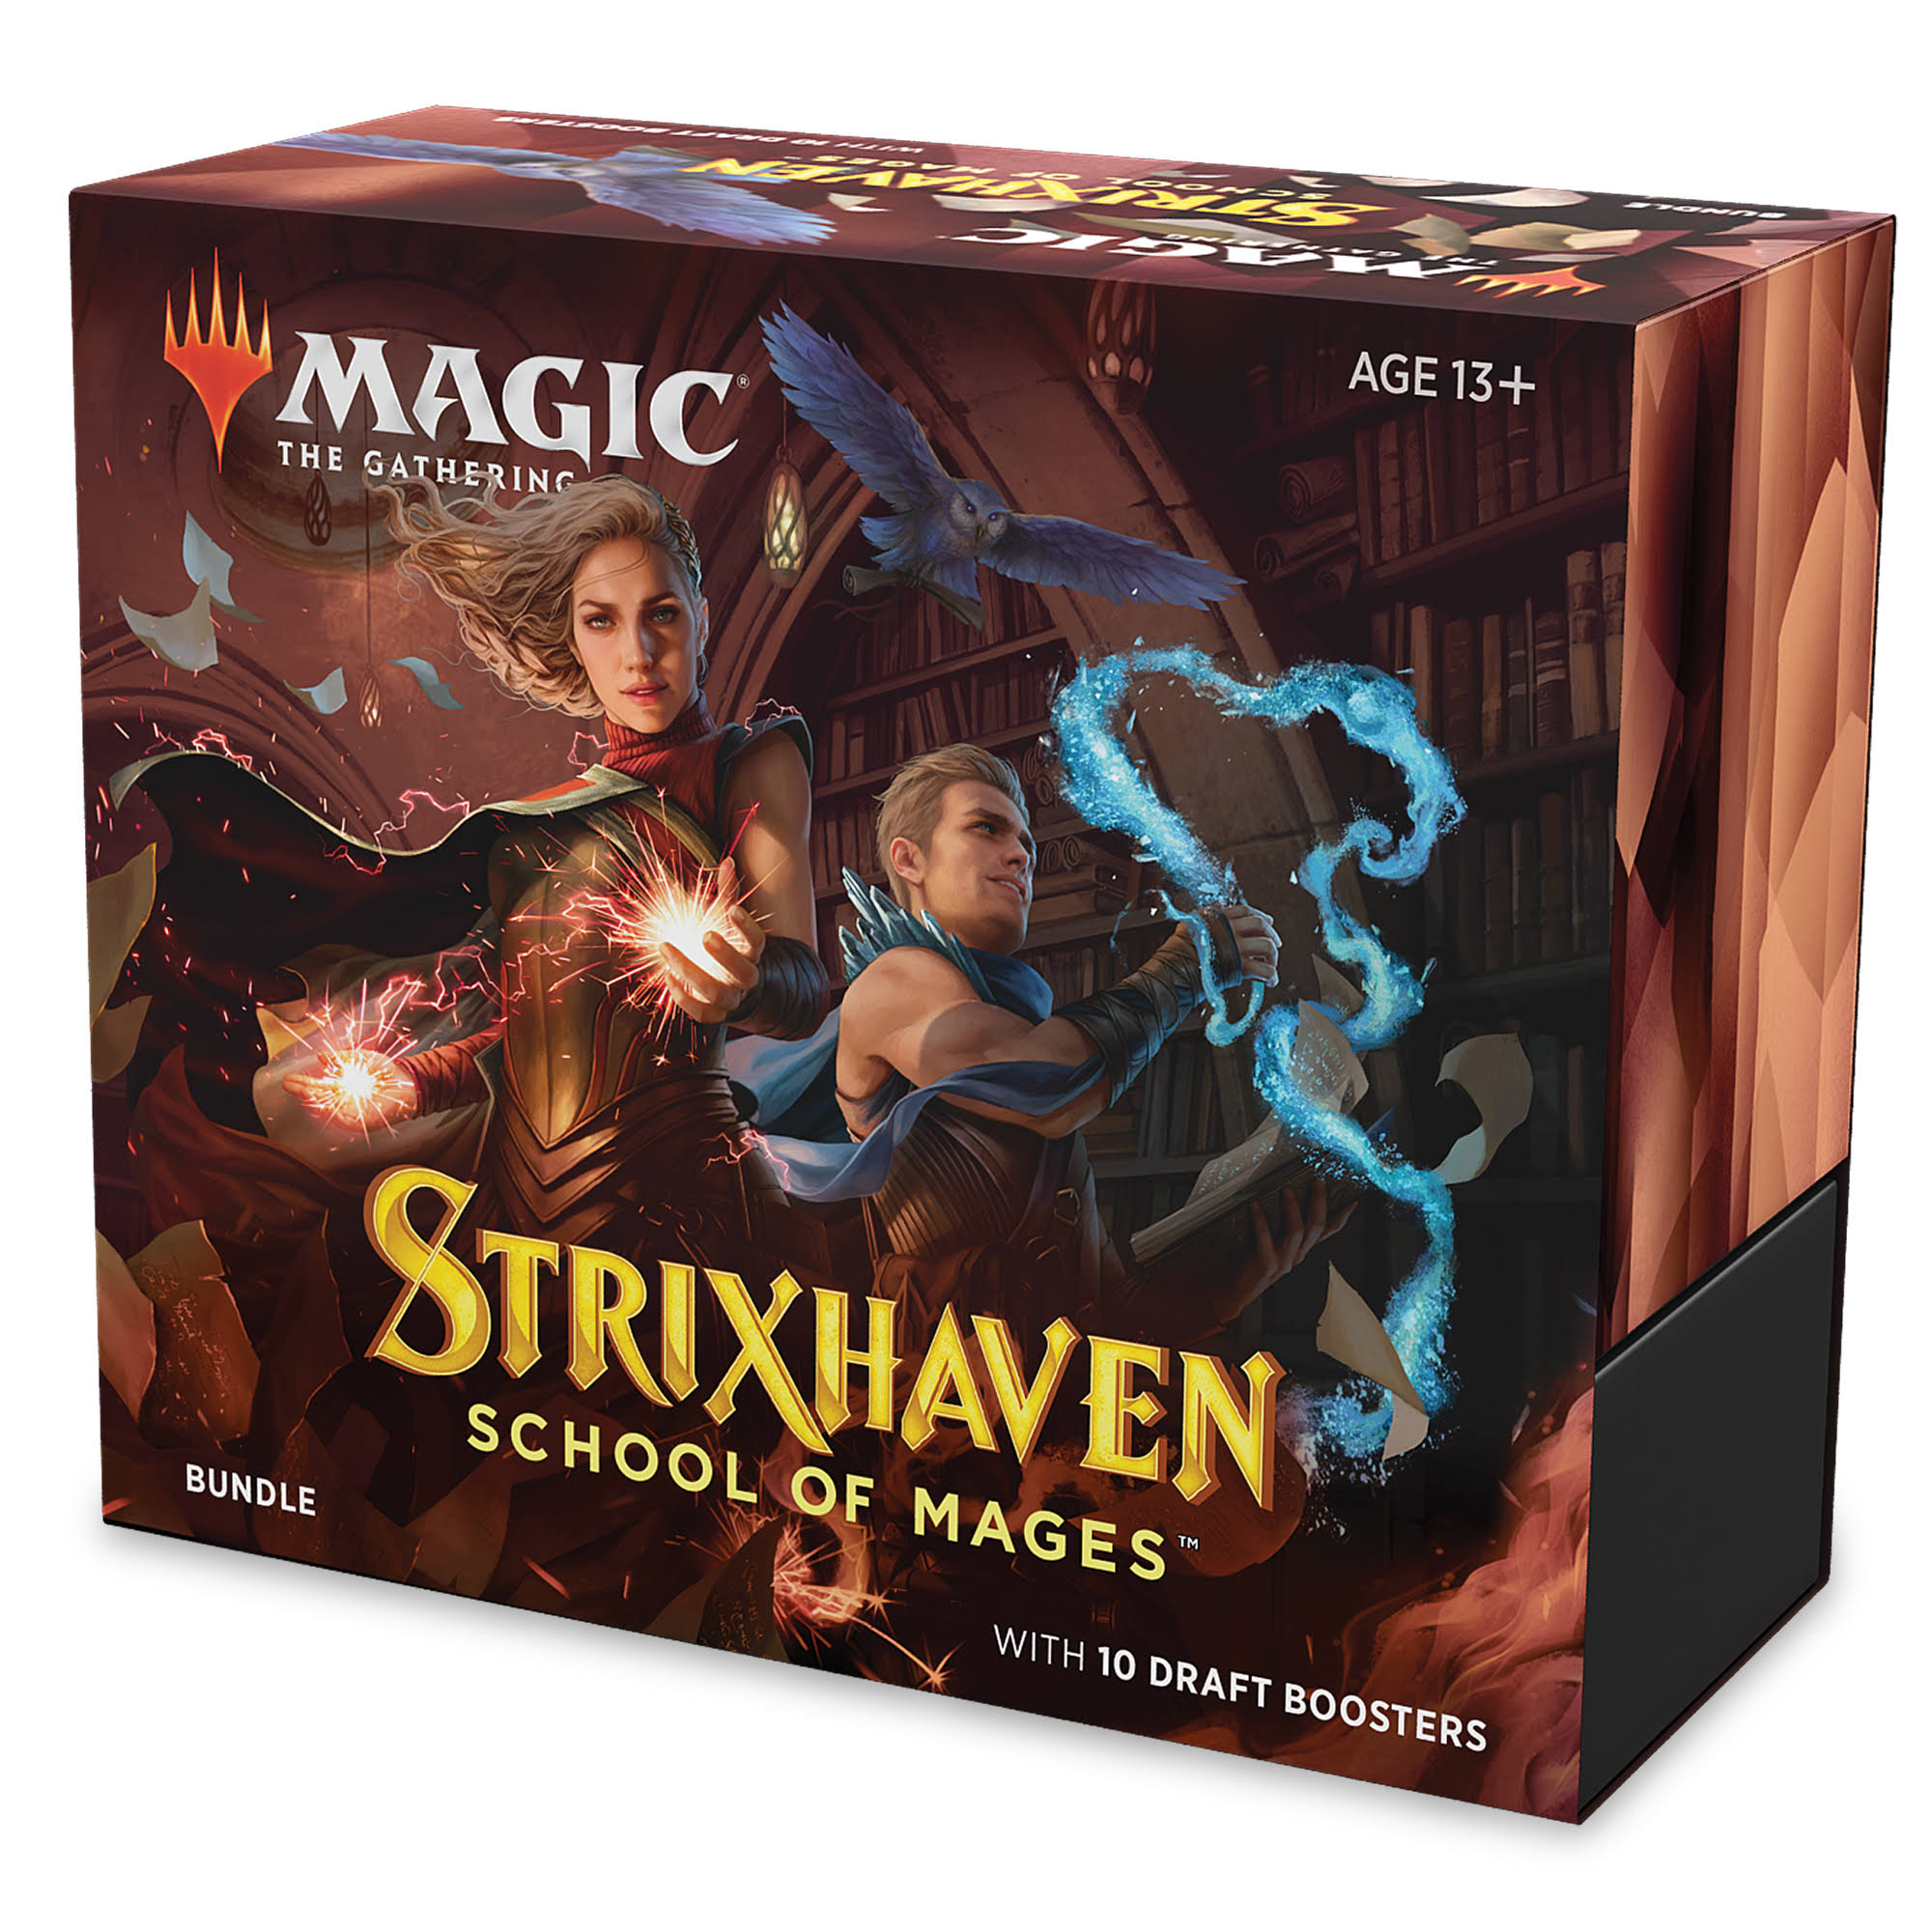 Magic The Gathering Strixhaven School of Mages Bundle